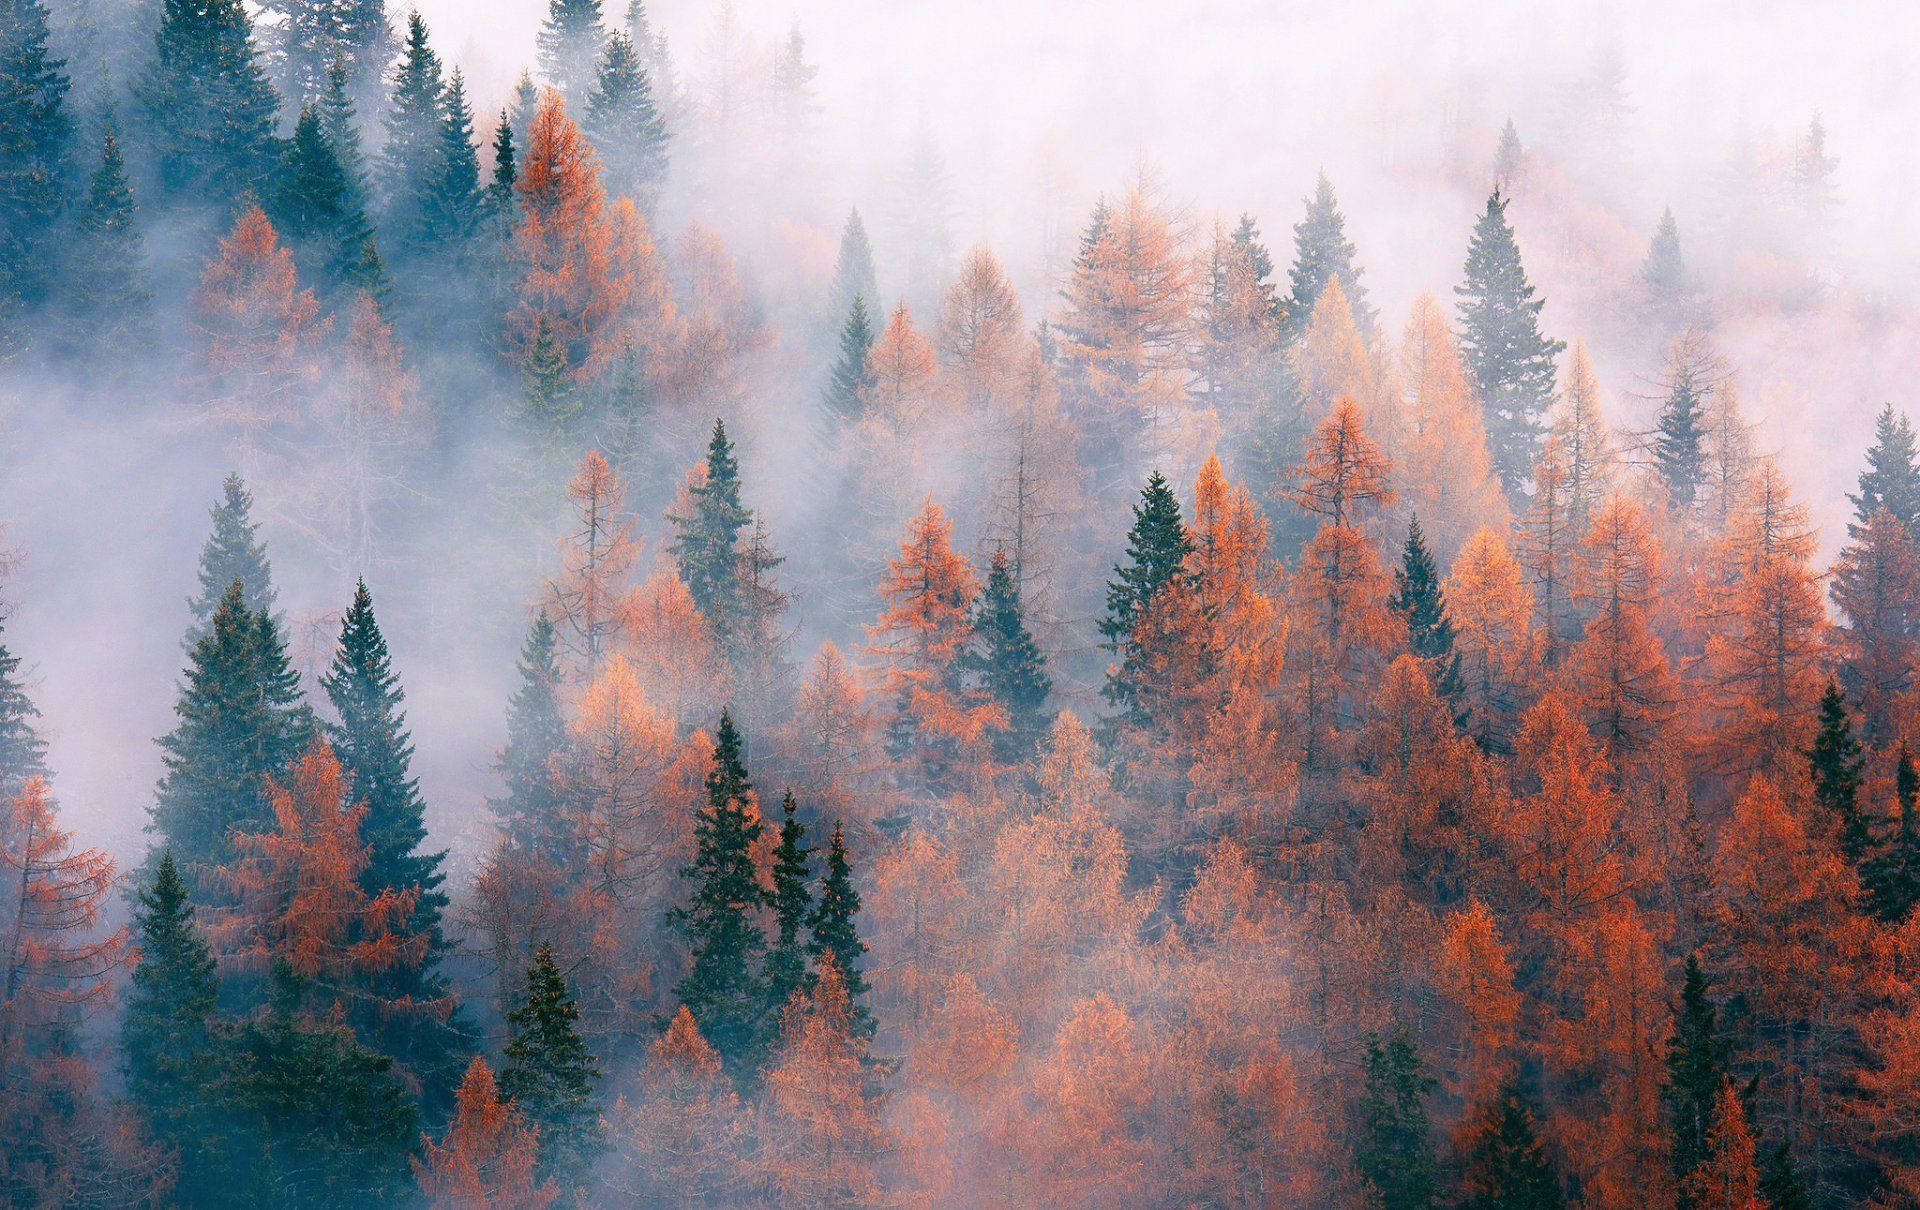 An Autumn fog envelopes a forest in the month of November Wallpaper